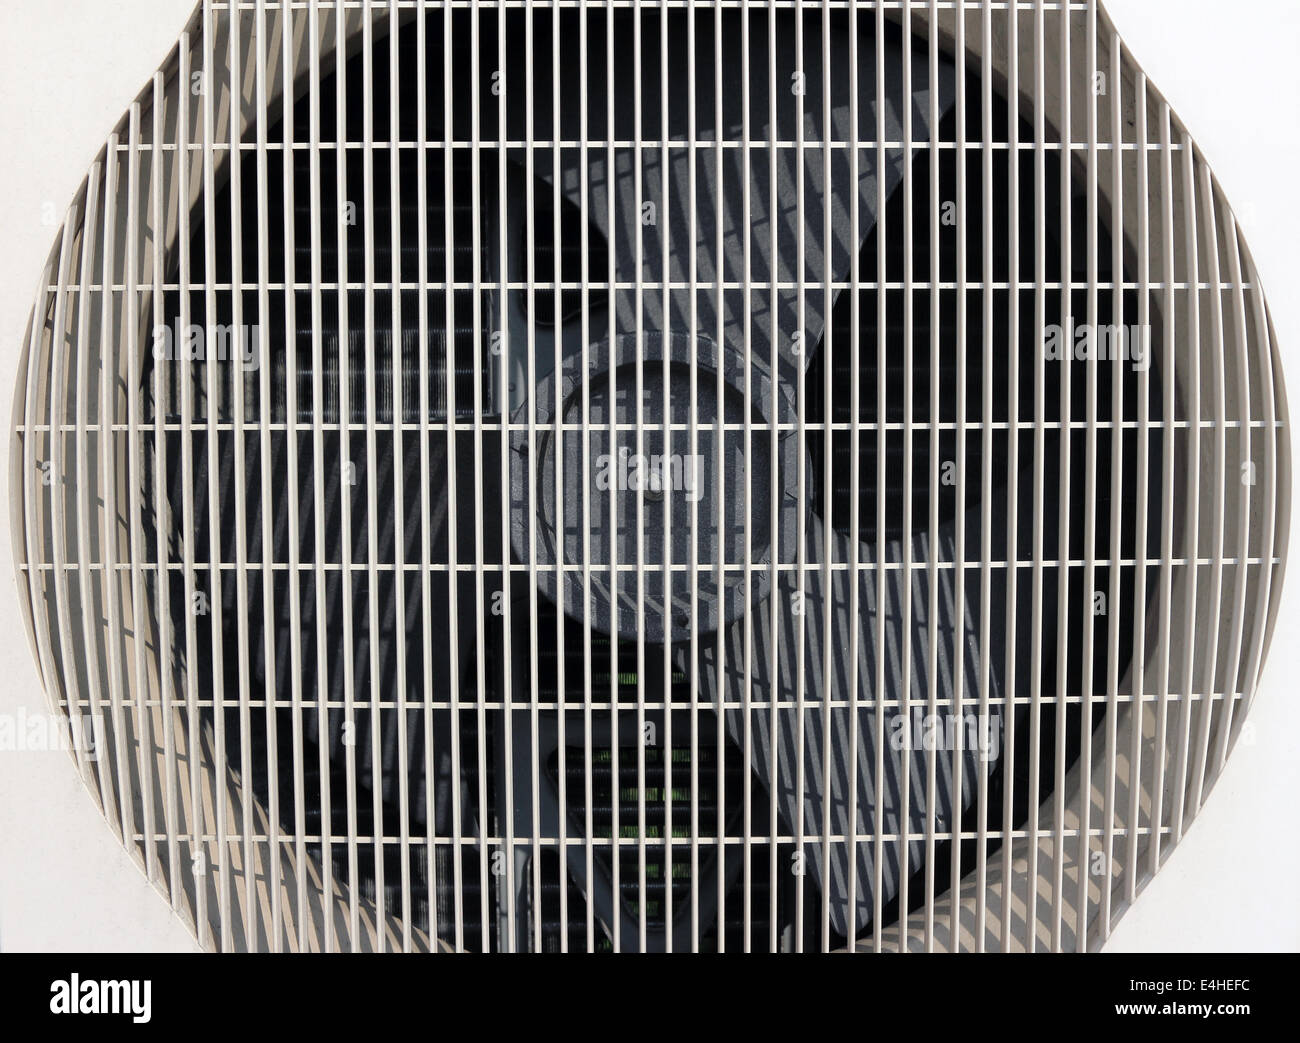 Ventilation fan of air conditioner Stock Photo